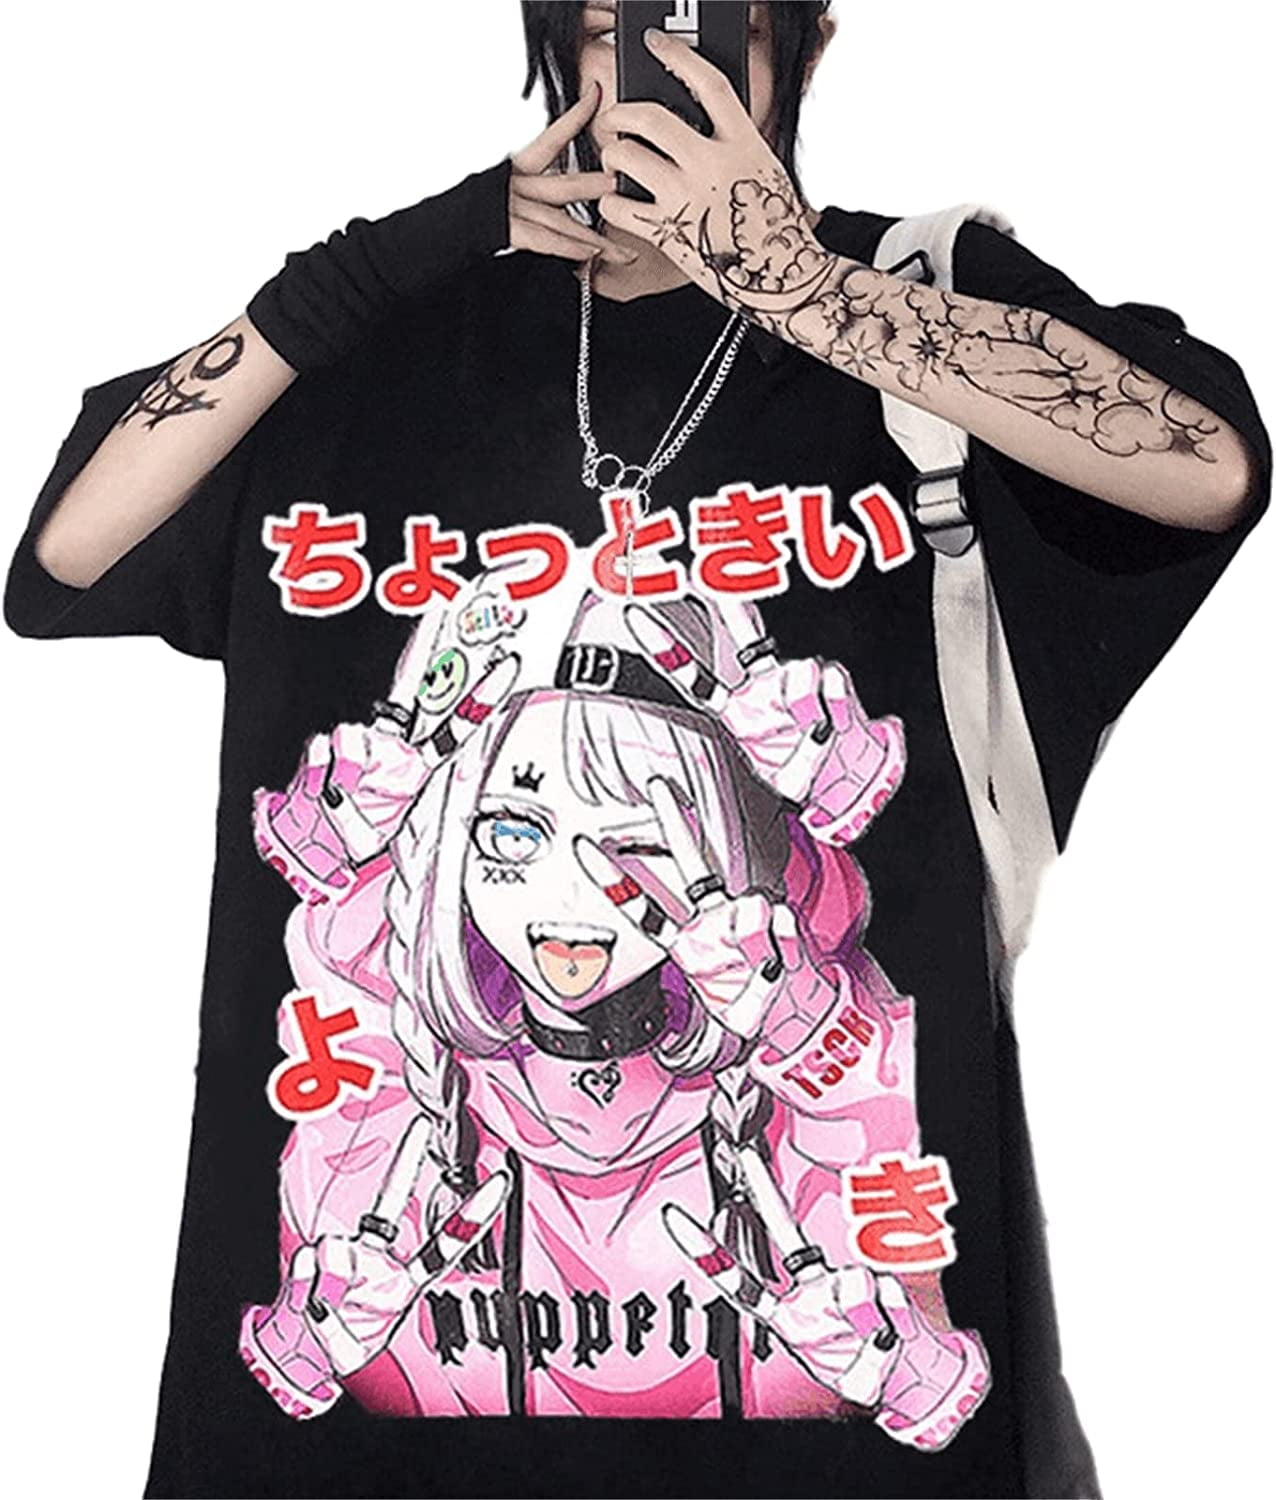 Dropship Crop Top Harajuku Brown T-shirt Female Sexy Anime Goth Print  Spring And Summer New Fashion T-shirt Women Tops to Sell Online at a Lower  Price